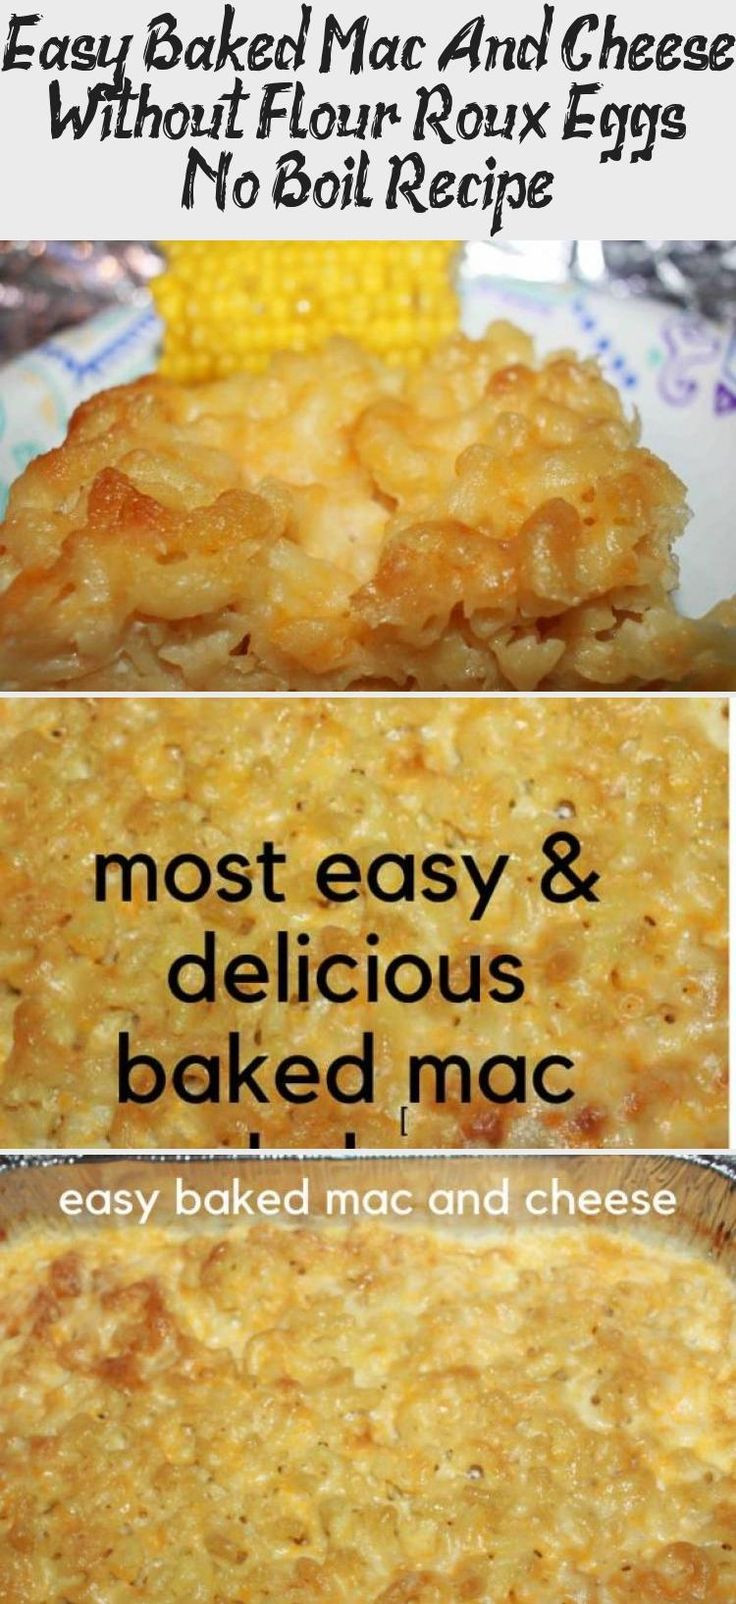 Baked Macaroni And Cheese Without Eggs
 Easy Baked Mac And Cheese Without Flour Without Roux No